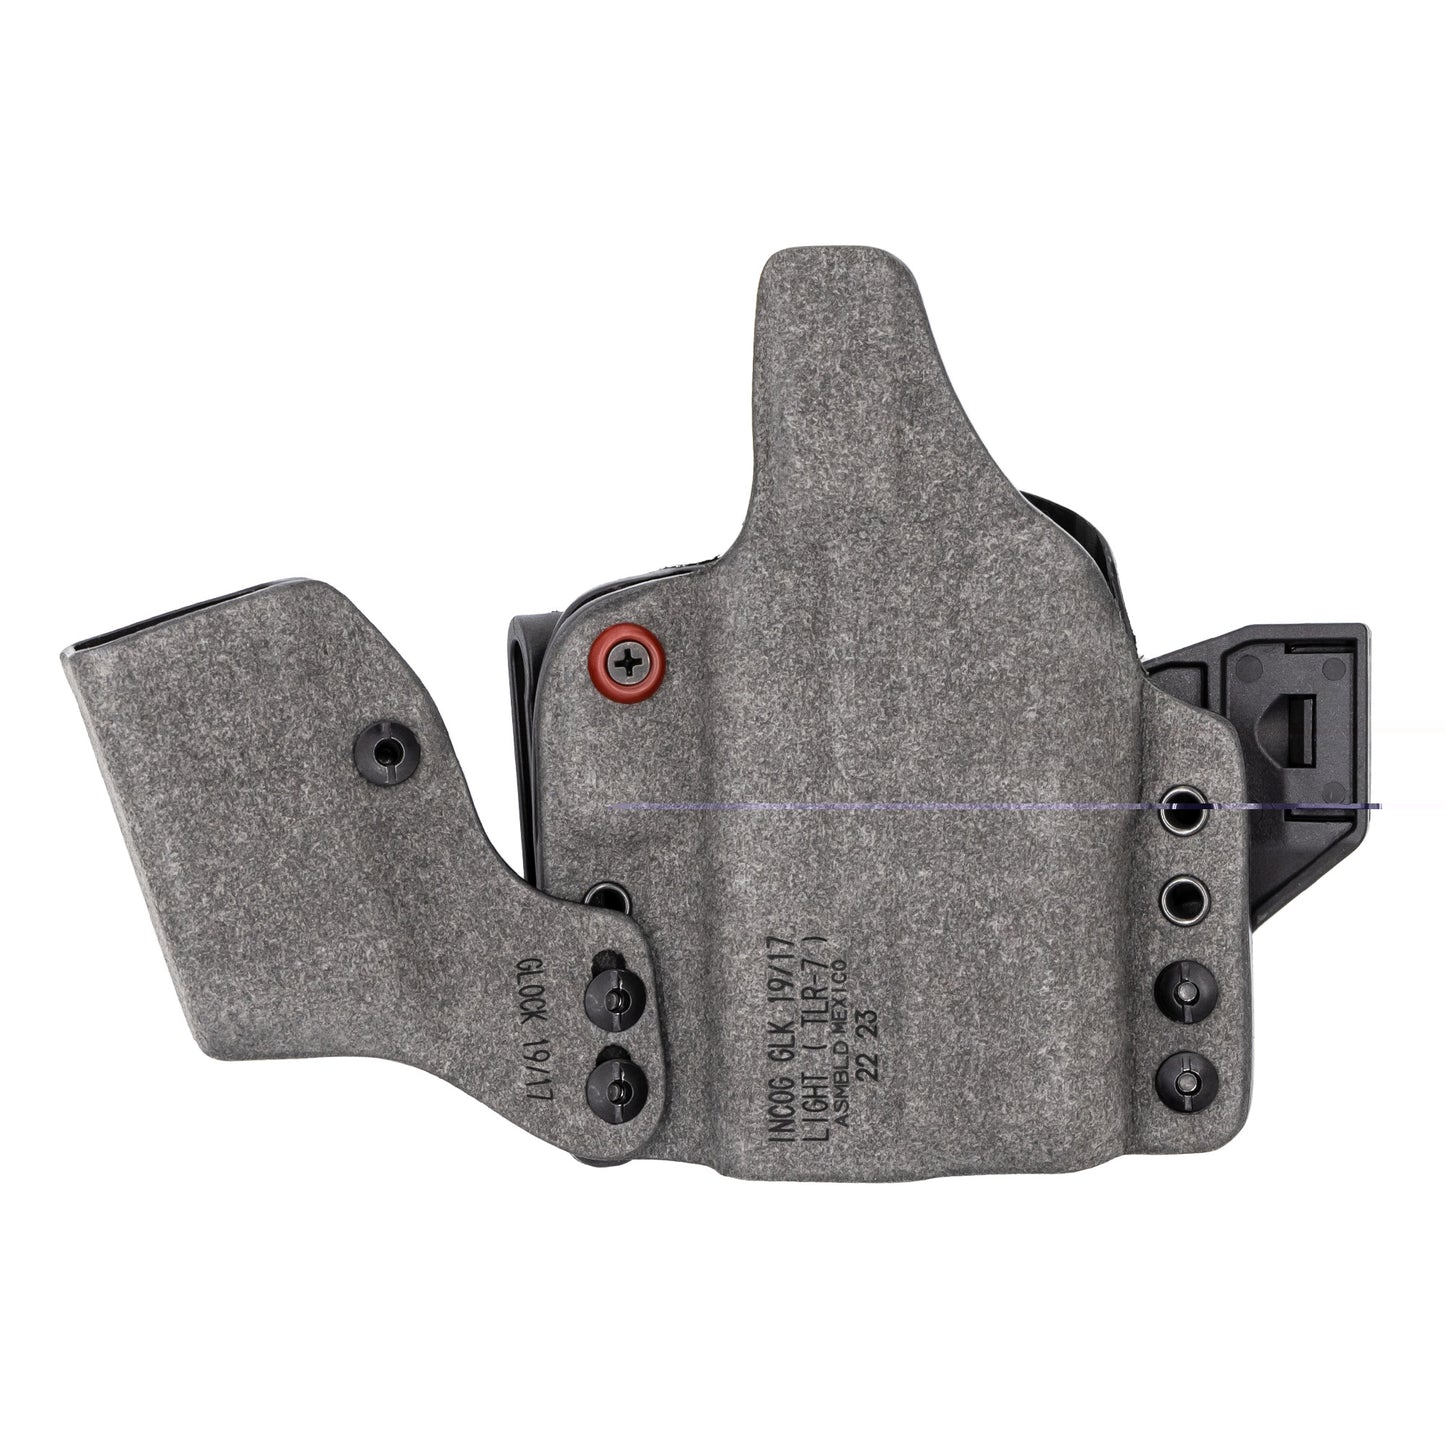 Safariland, INCOG, Joint Collaboration with Haley Strategic, Inside the Waistband Holster, For Glock 17/19, Integrated Magazine Caddy, Black, Right Hand